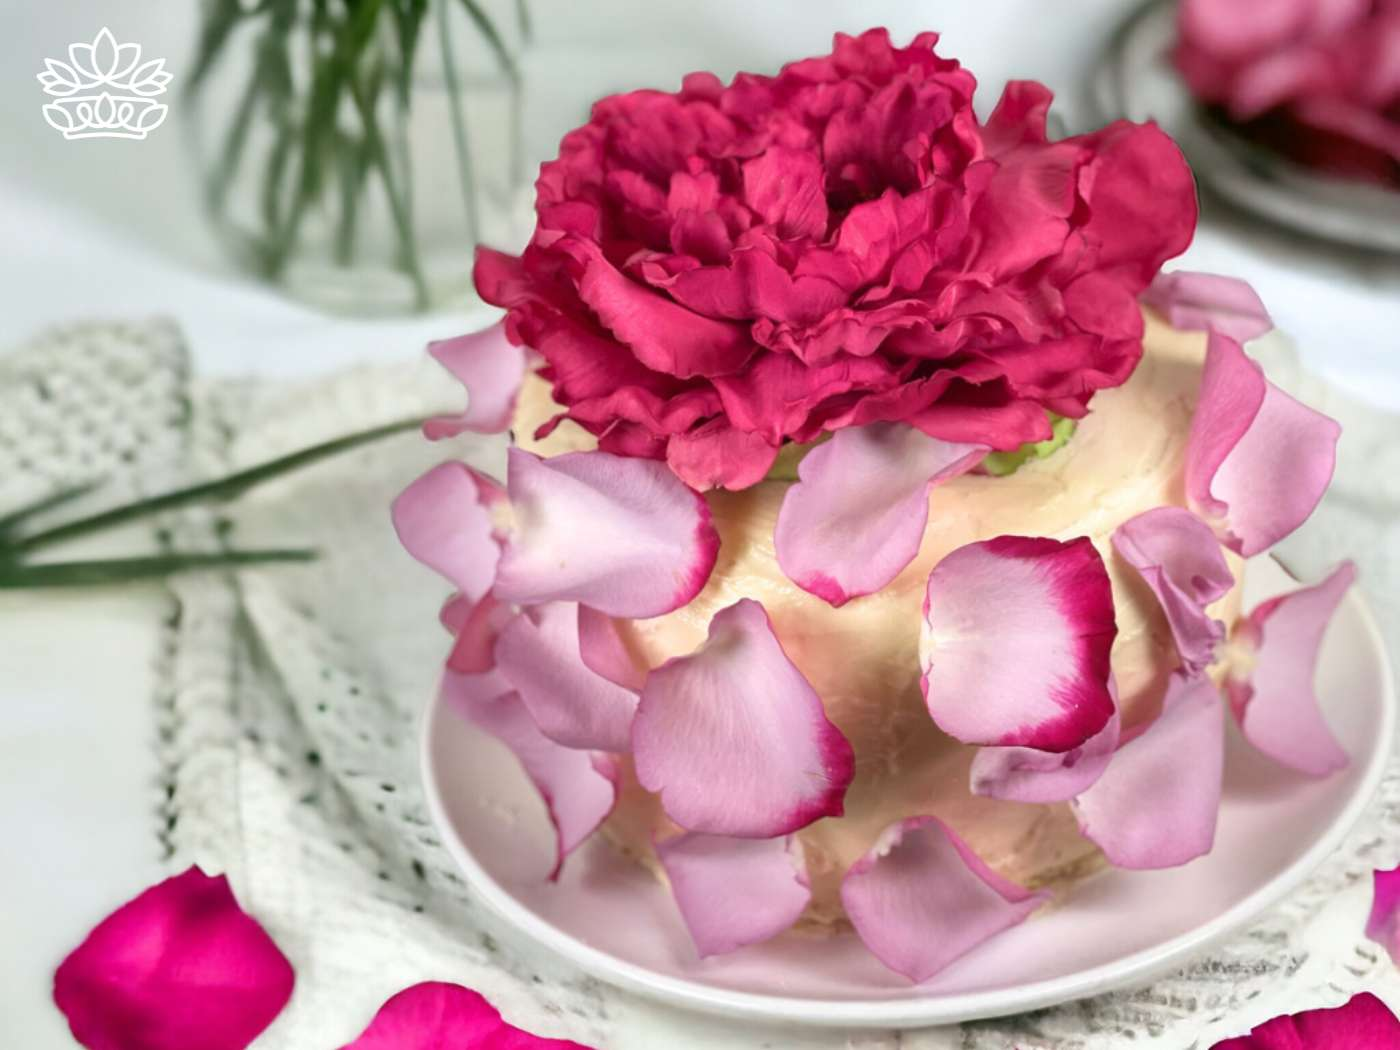 A sumptuous cake crowned with a lush pink peony and surrounded by scattered rose petals, presented on a delicate lace tablecloth, a signature offering from Fabulous Flowers and Gifts.